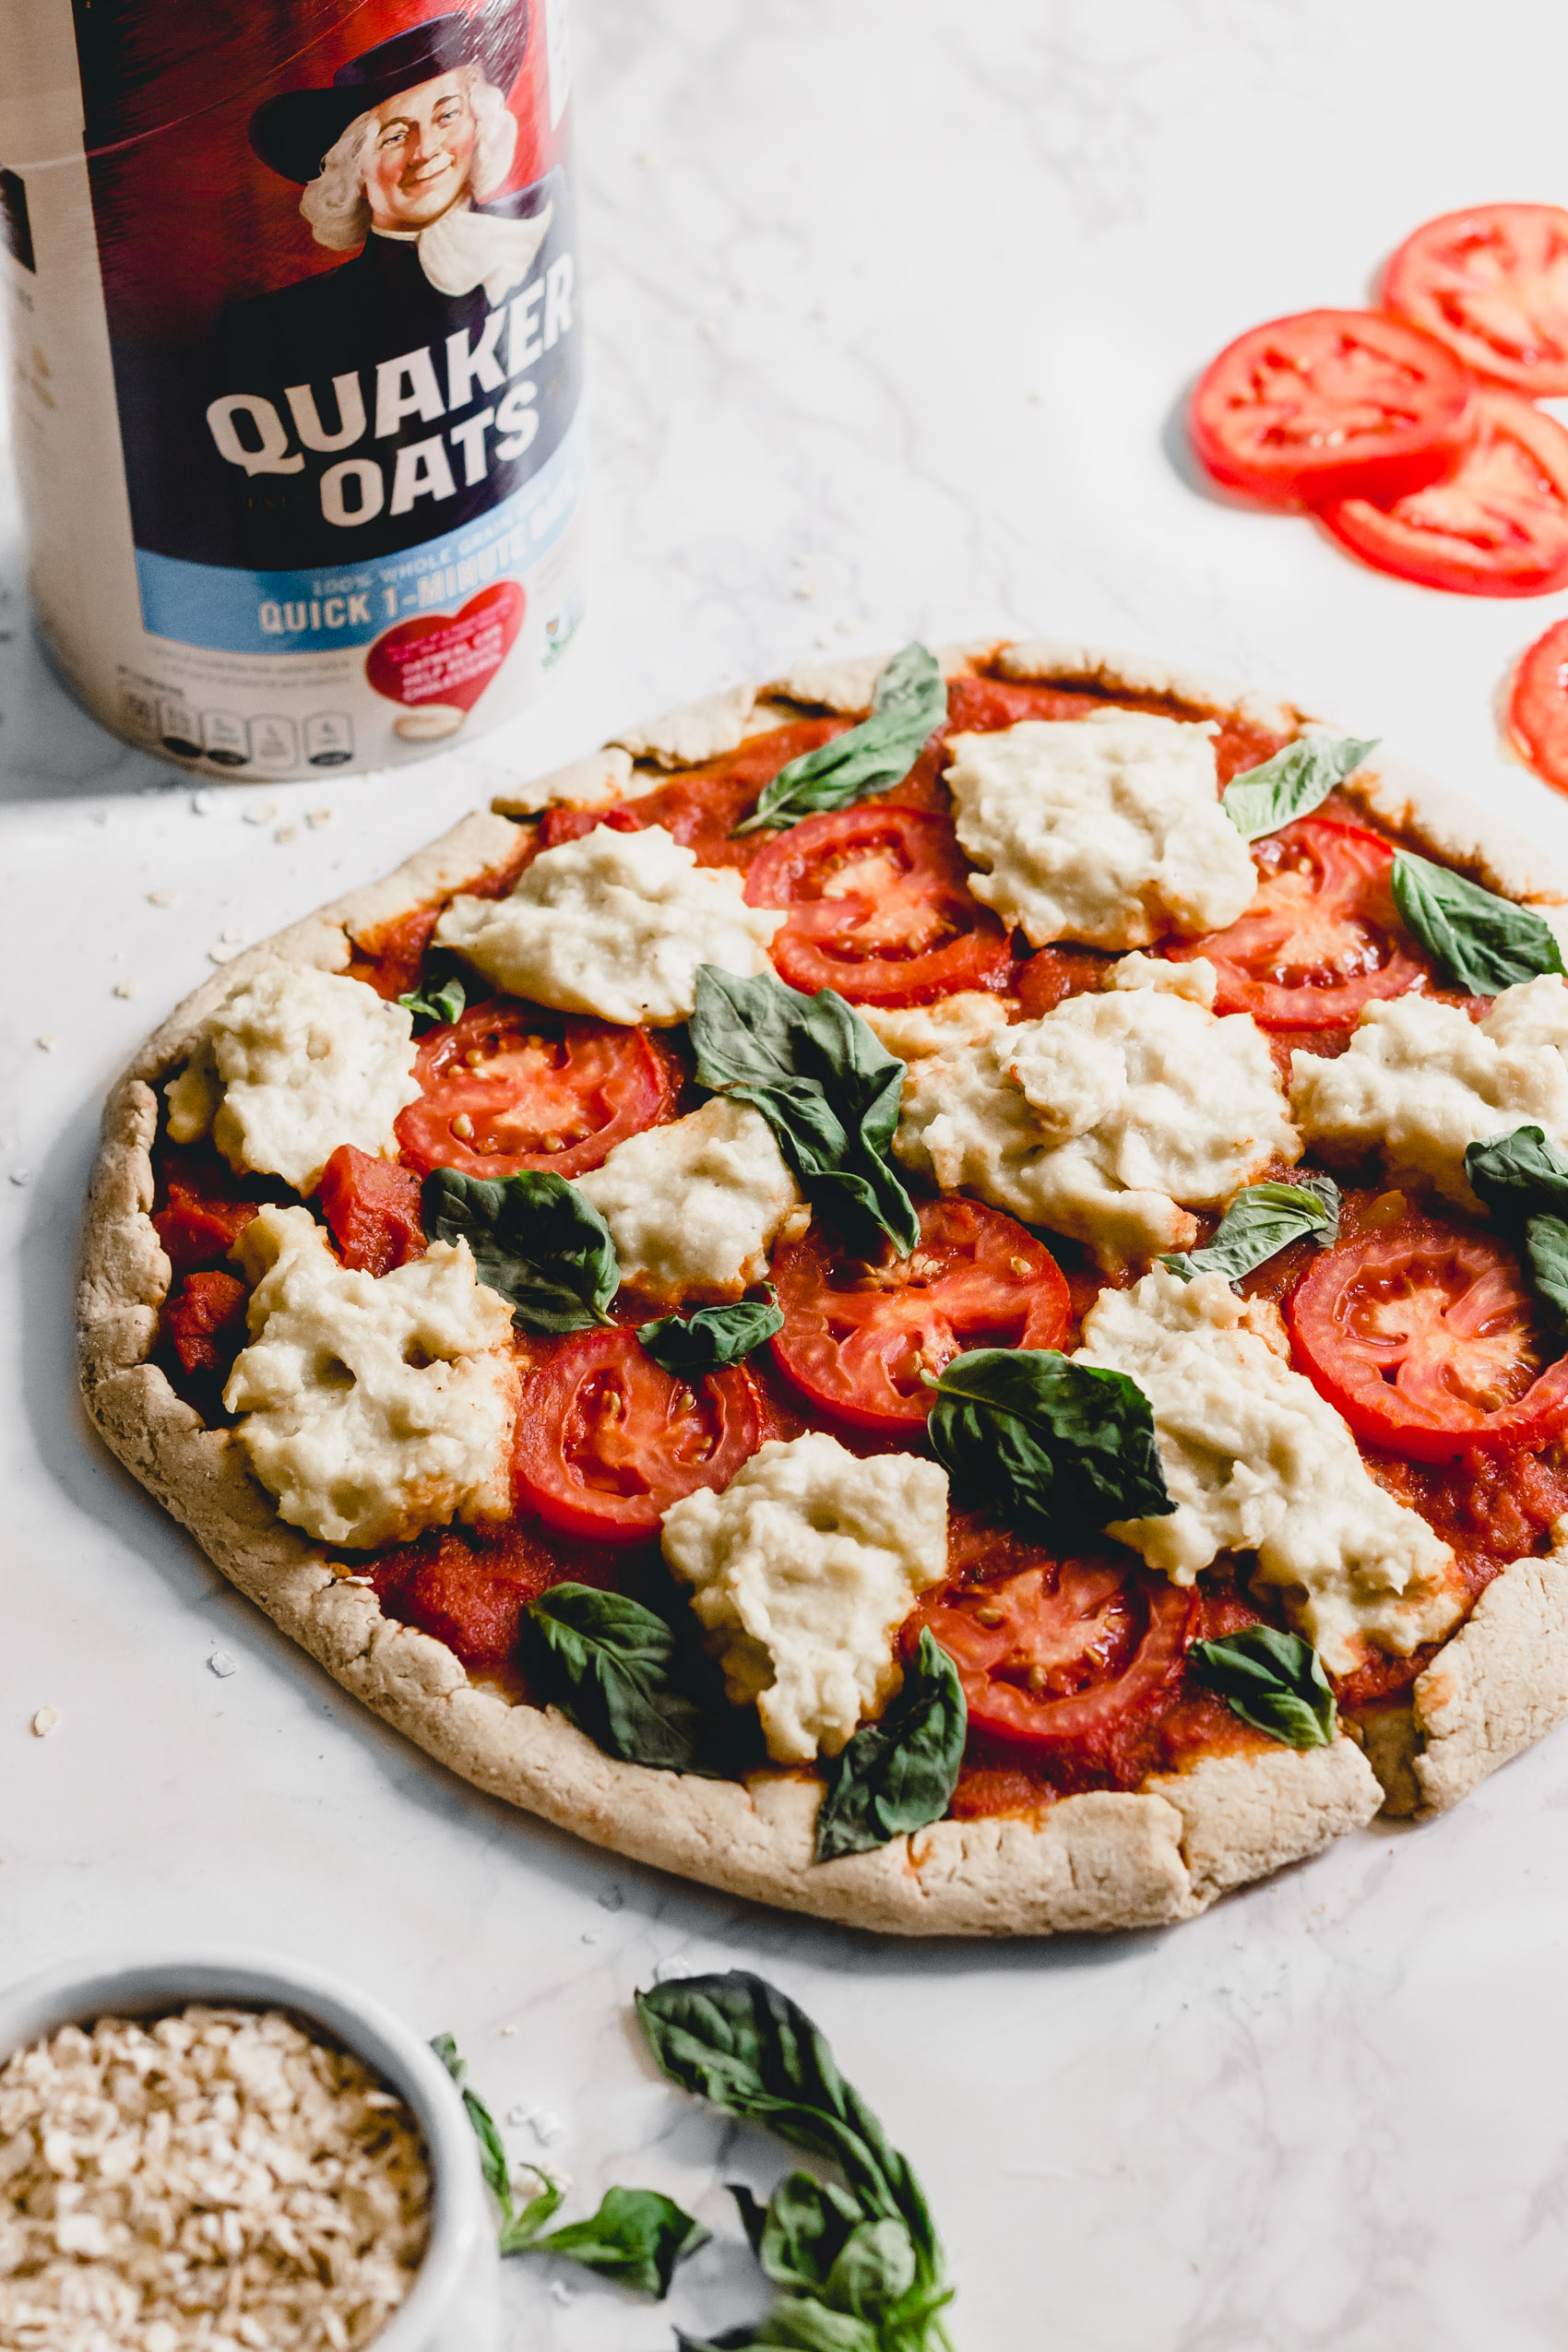 a homemade vegan pizza next to a container of Quaker oats